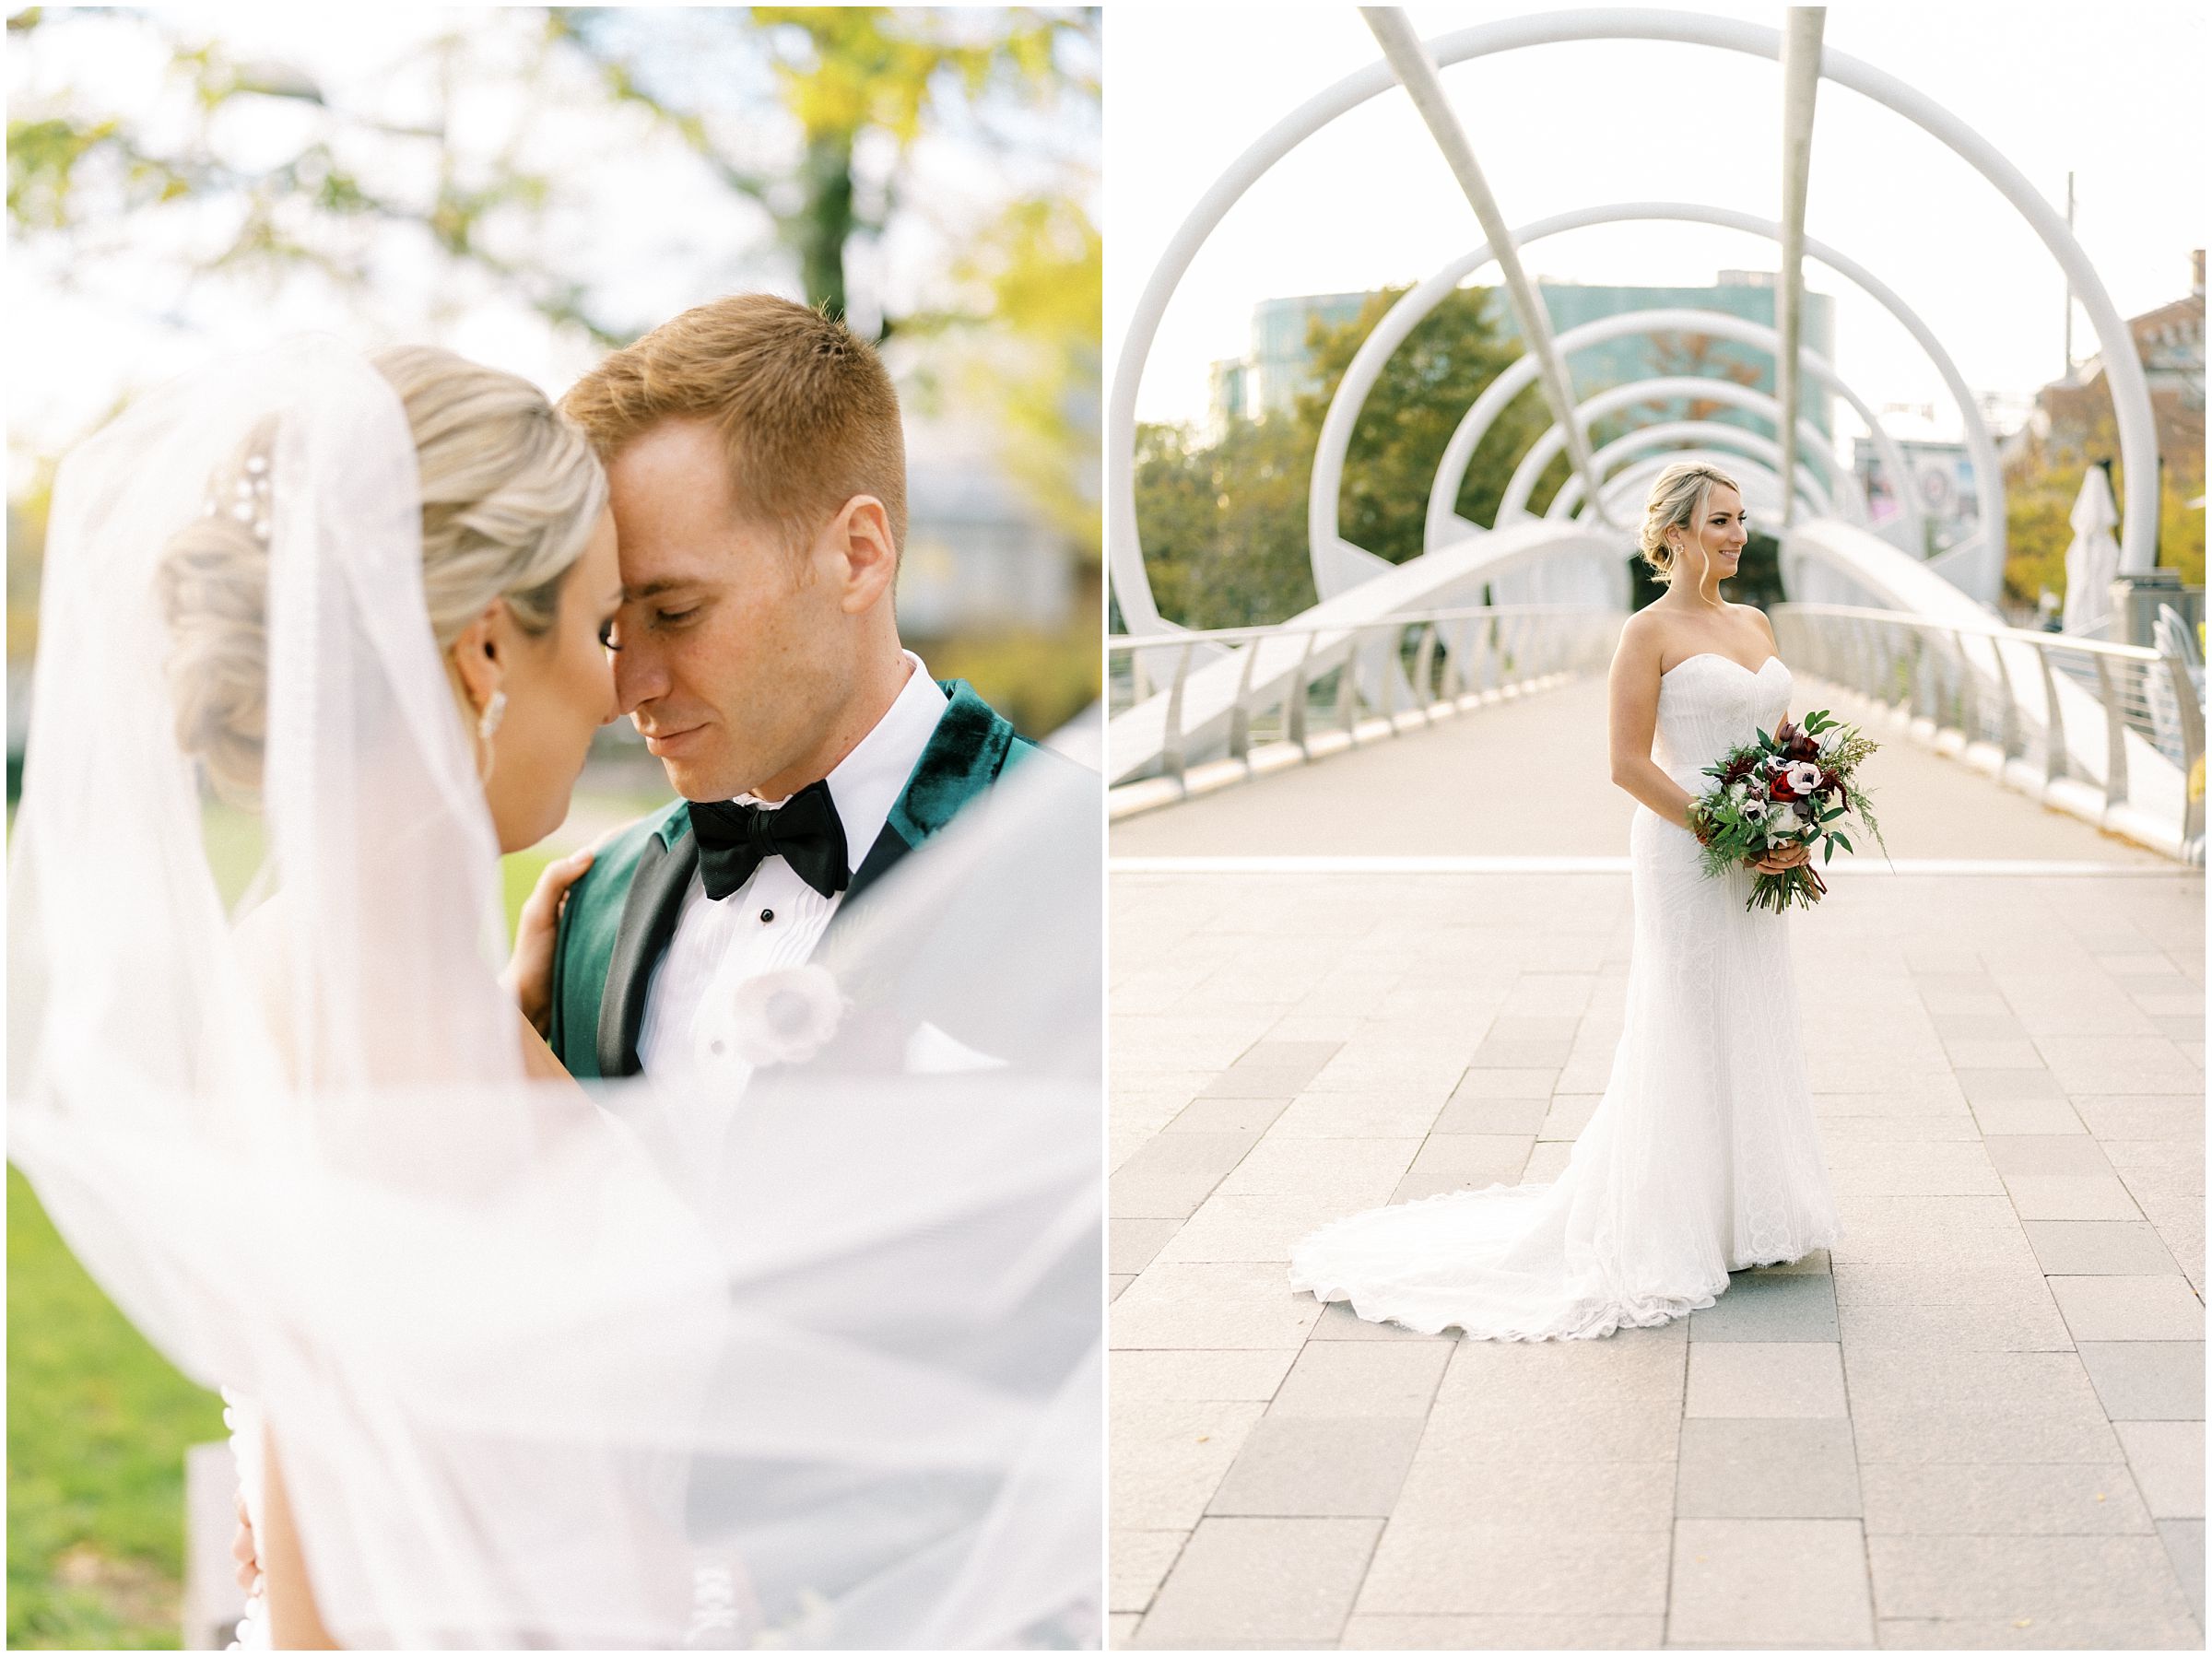 Wedding portraits at District Winery in Washington DC